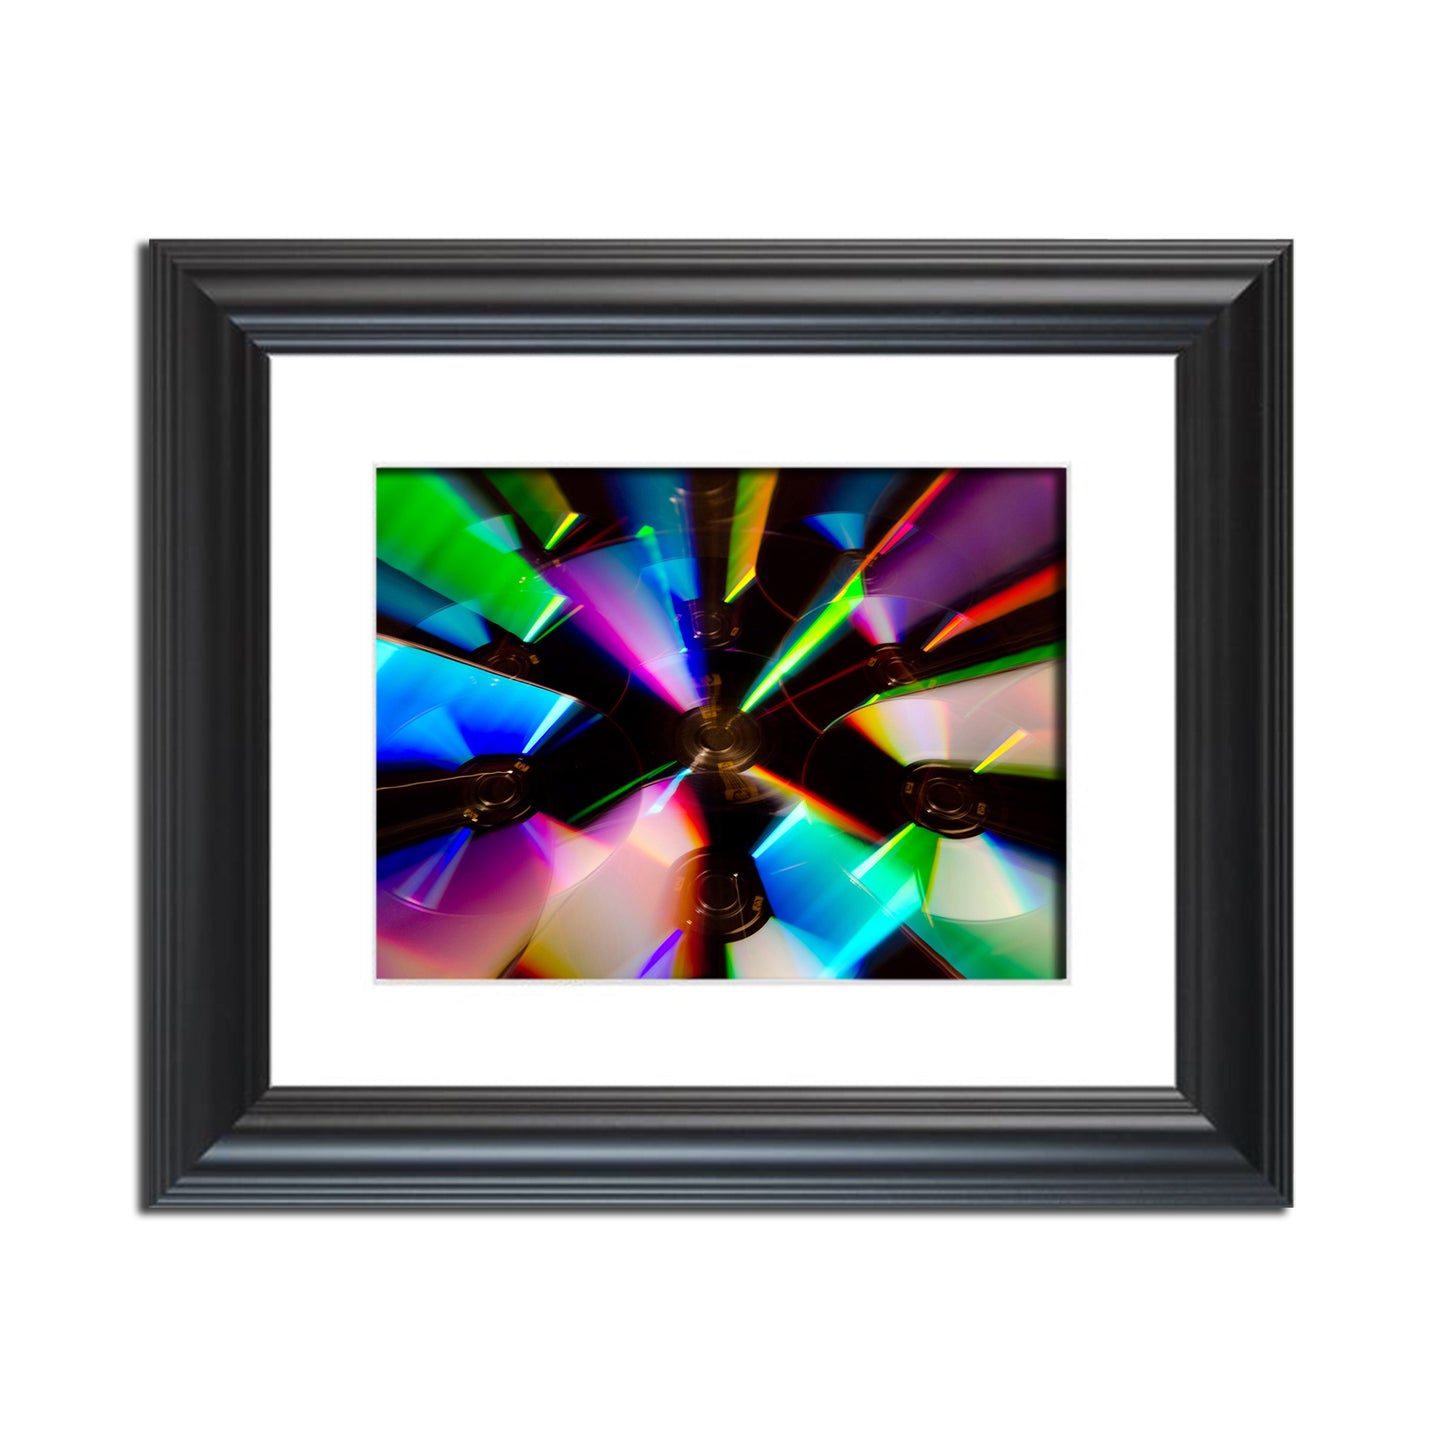 Zoomed CDs Abstract Photo Fine Art Canvas & Unframed Wall Art Prints  - PIPAFINEART